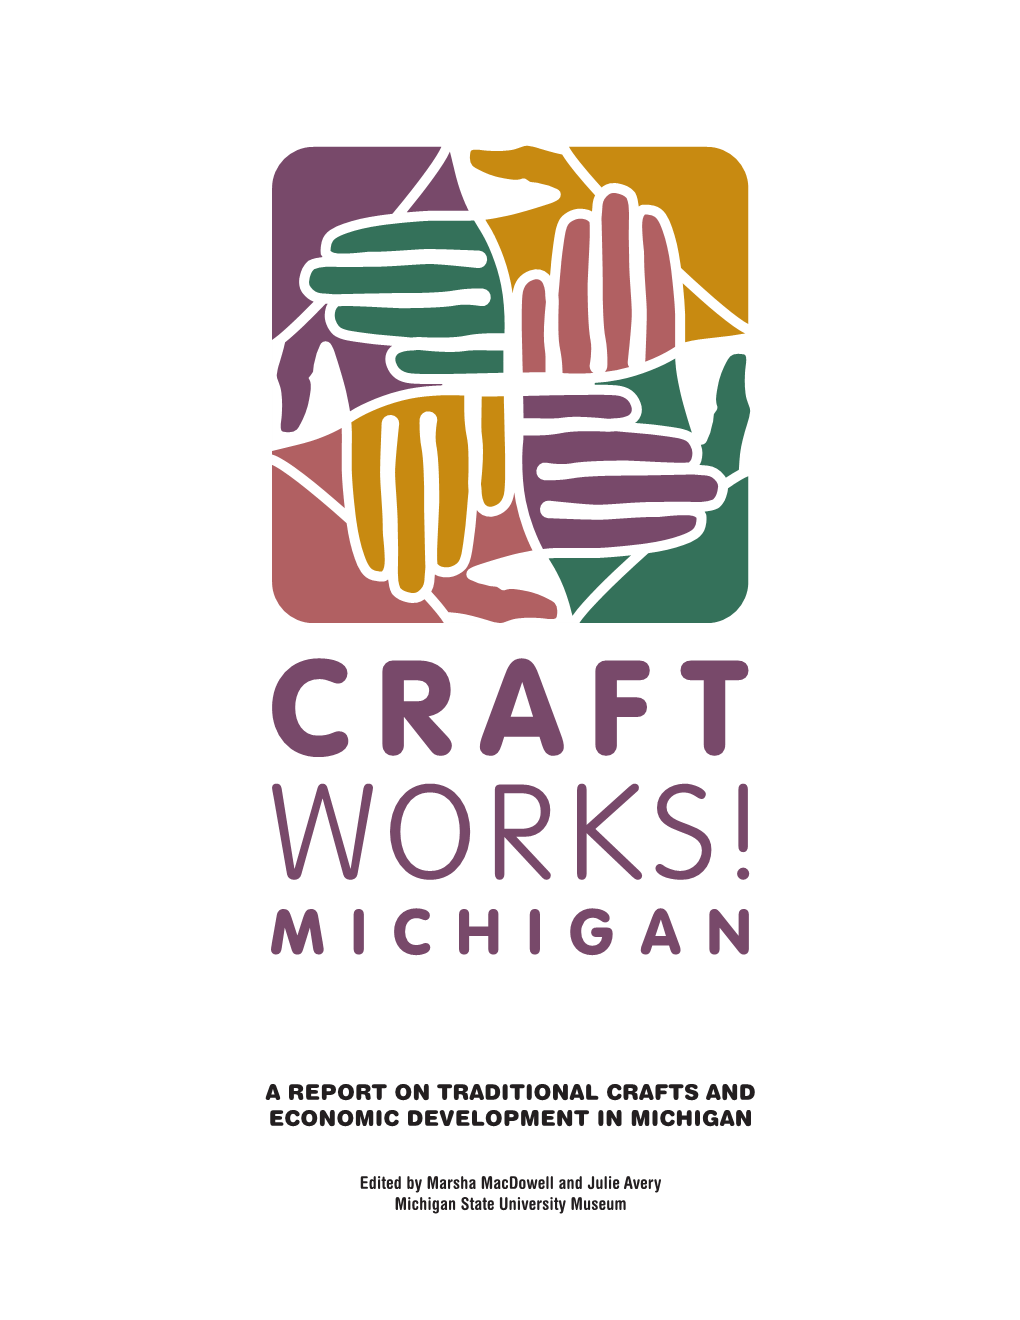 A Report on Traditional Crafts and Economic Development in Michigan